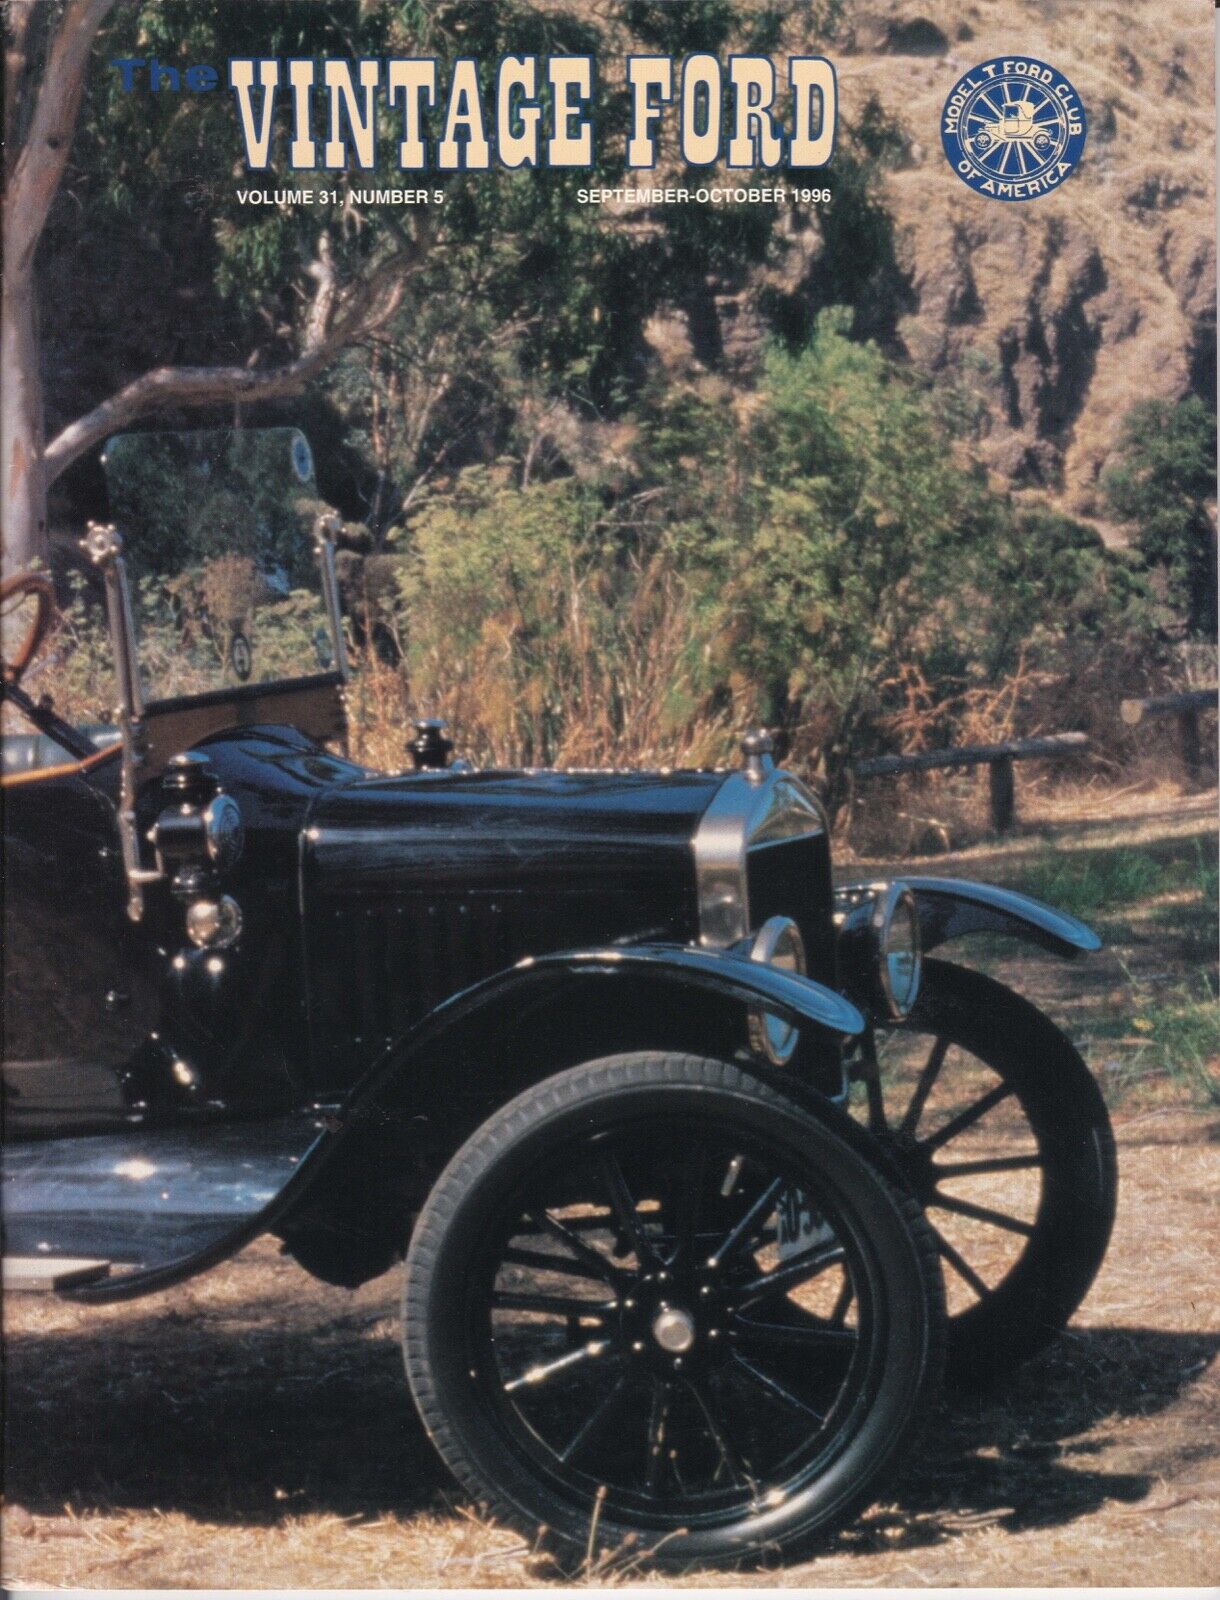 AUSTRALIAN 1917 TOURING -  THE VINTAGE FORD MAGAZINE - AUTOMOTIVE INDUSTRY